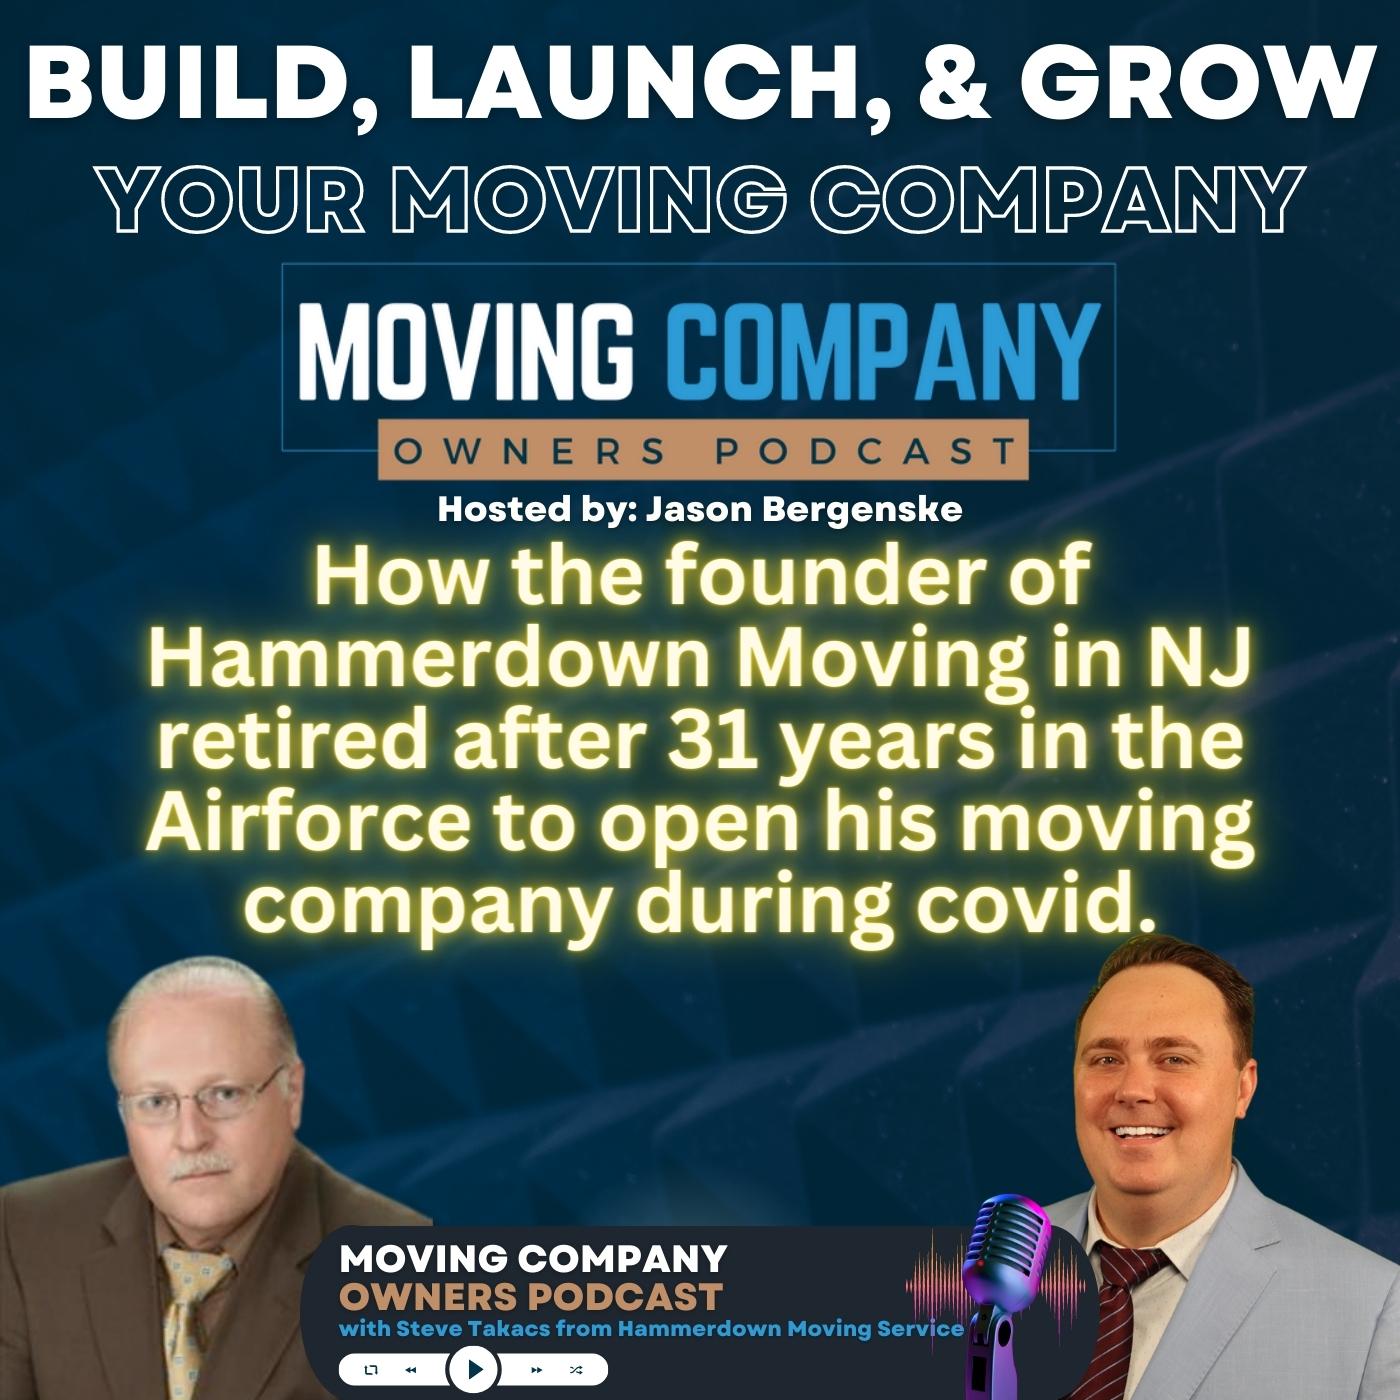 How the founder of Hammerdown Moving in NJ retired after 31 years in the Airforce to open his moving company during covid.